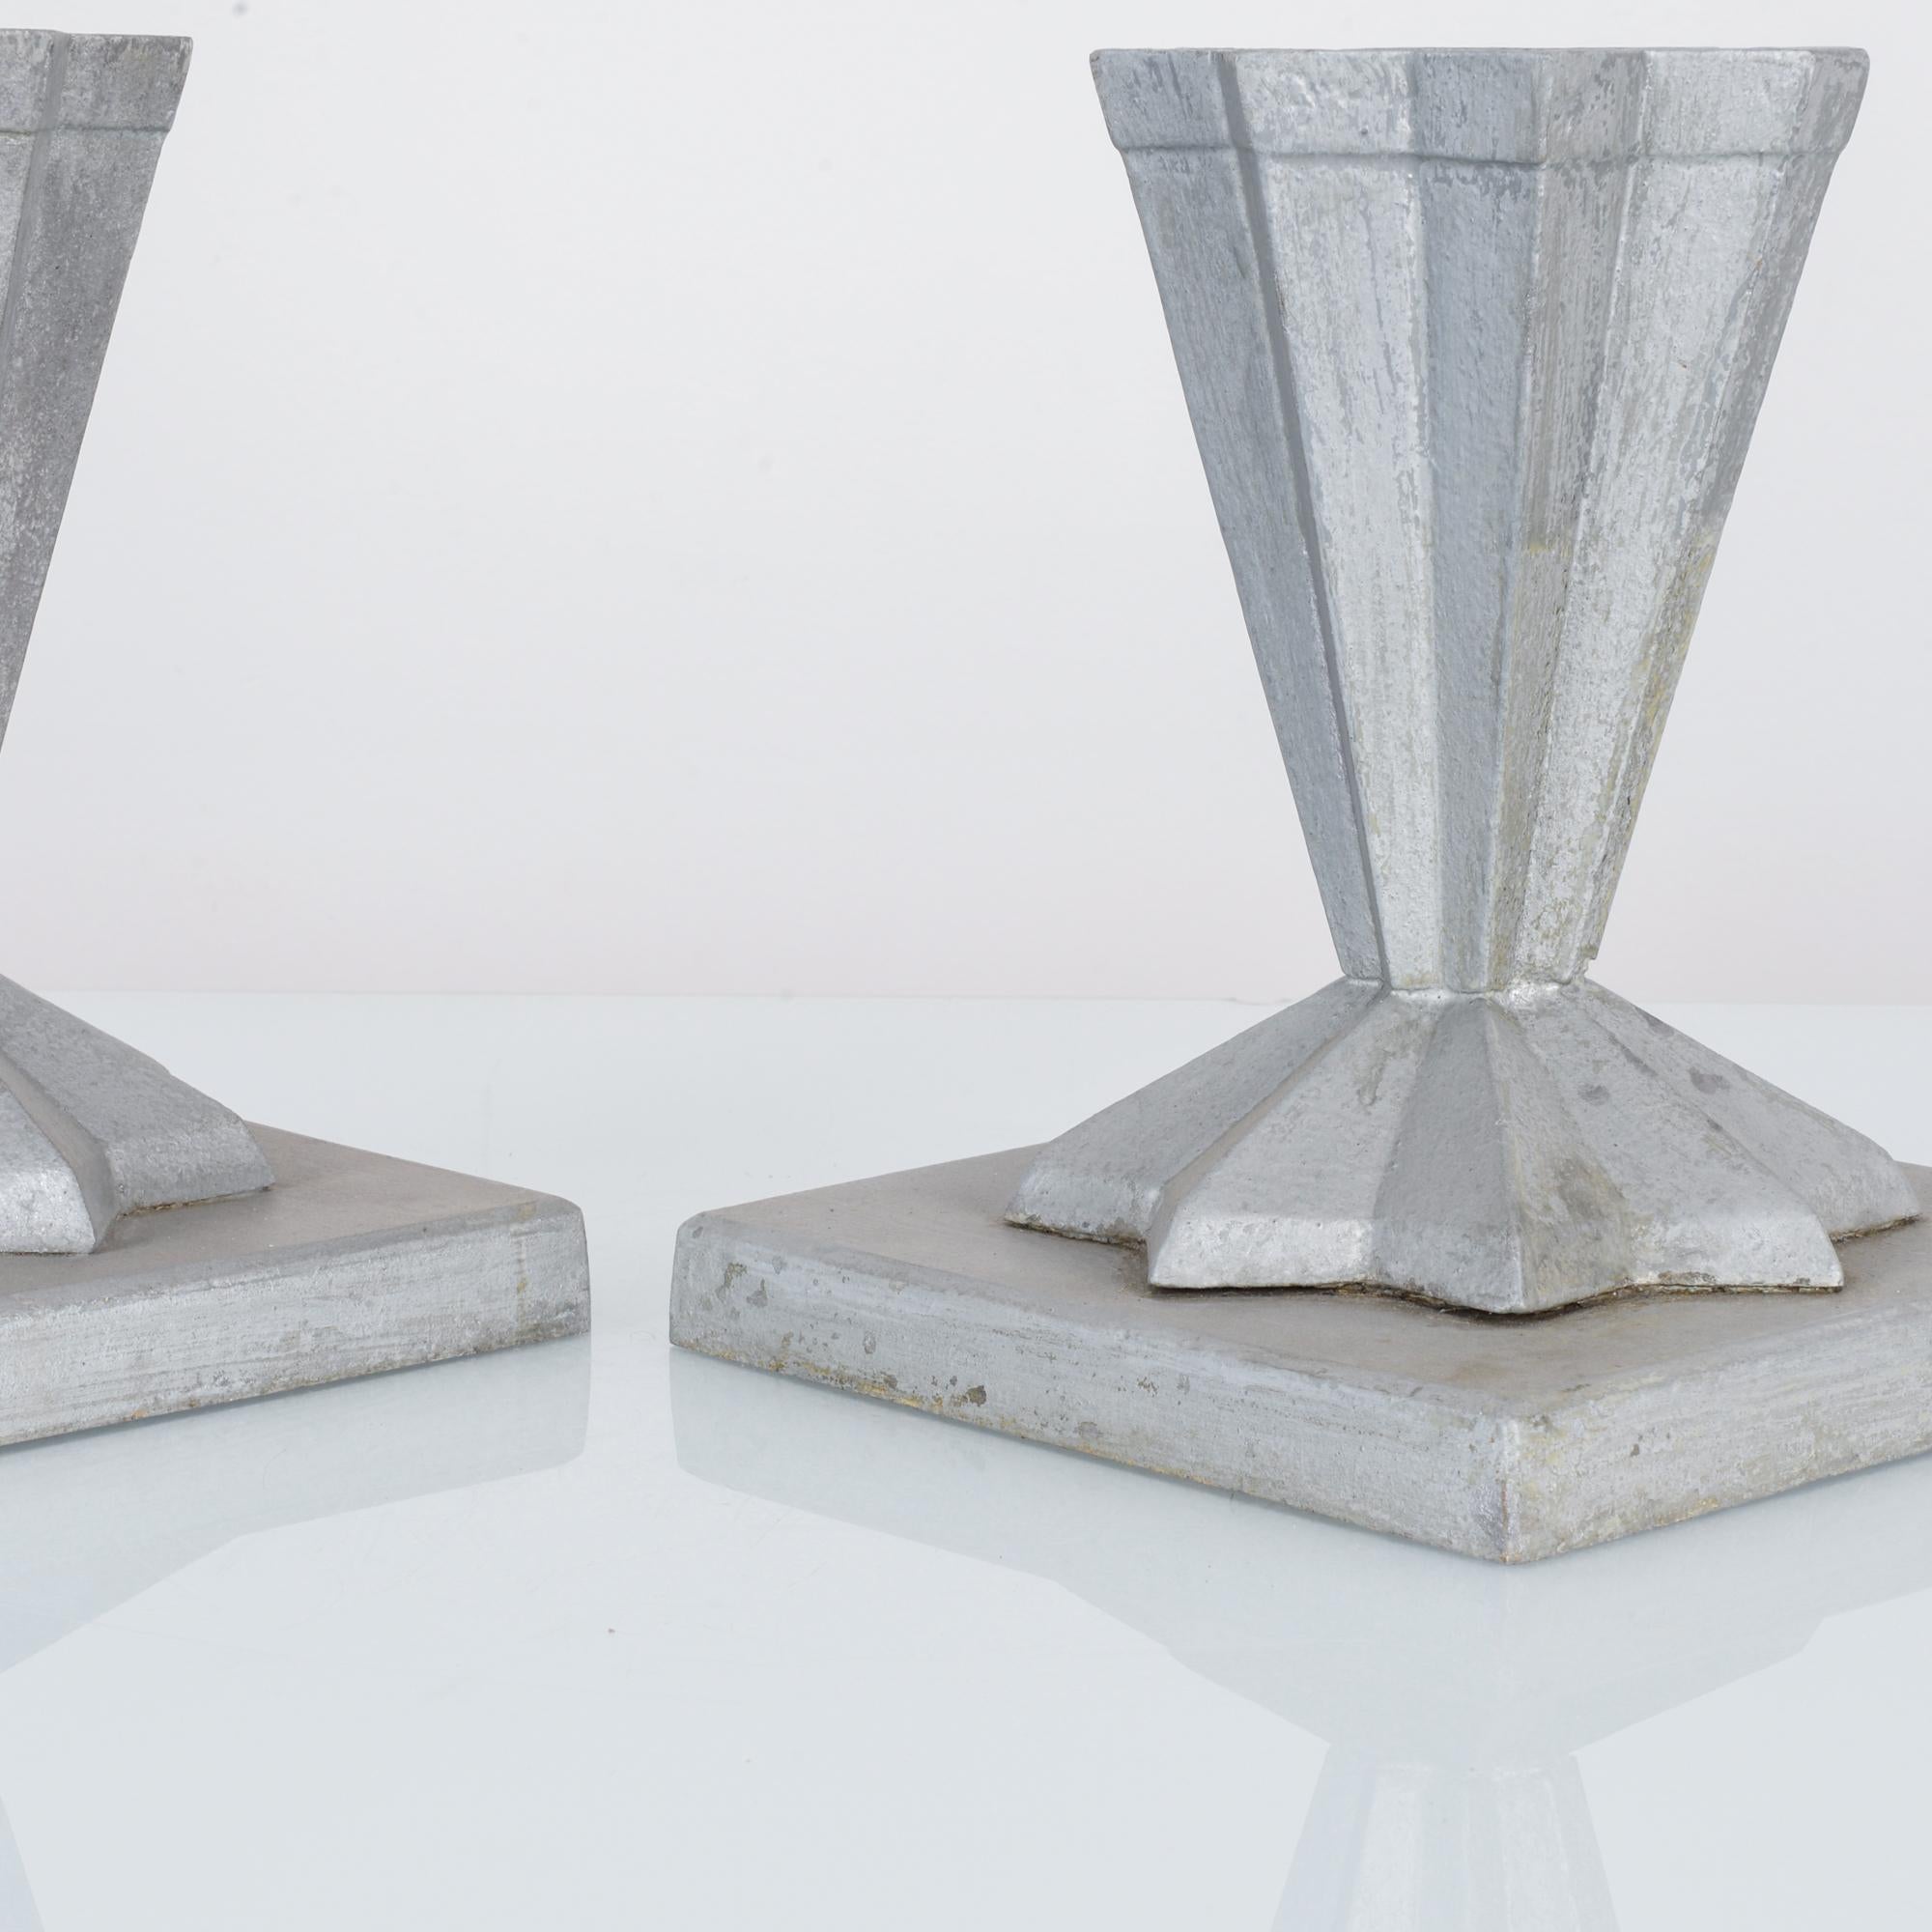 Early 20th Century French Cast Aluminum Planters, a Pair 1